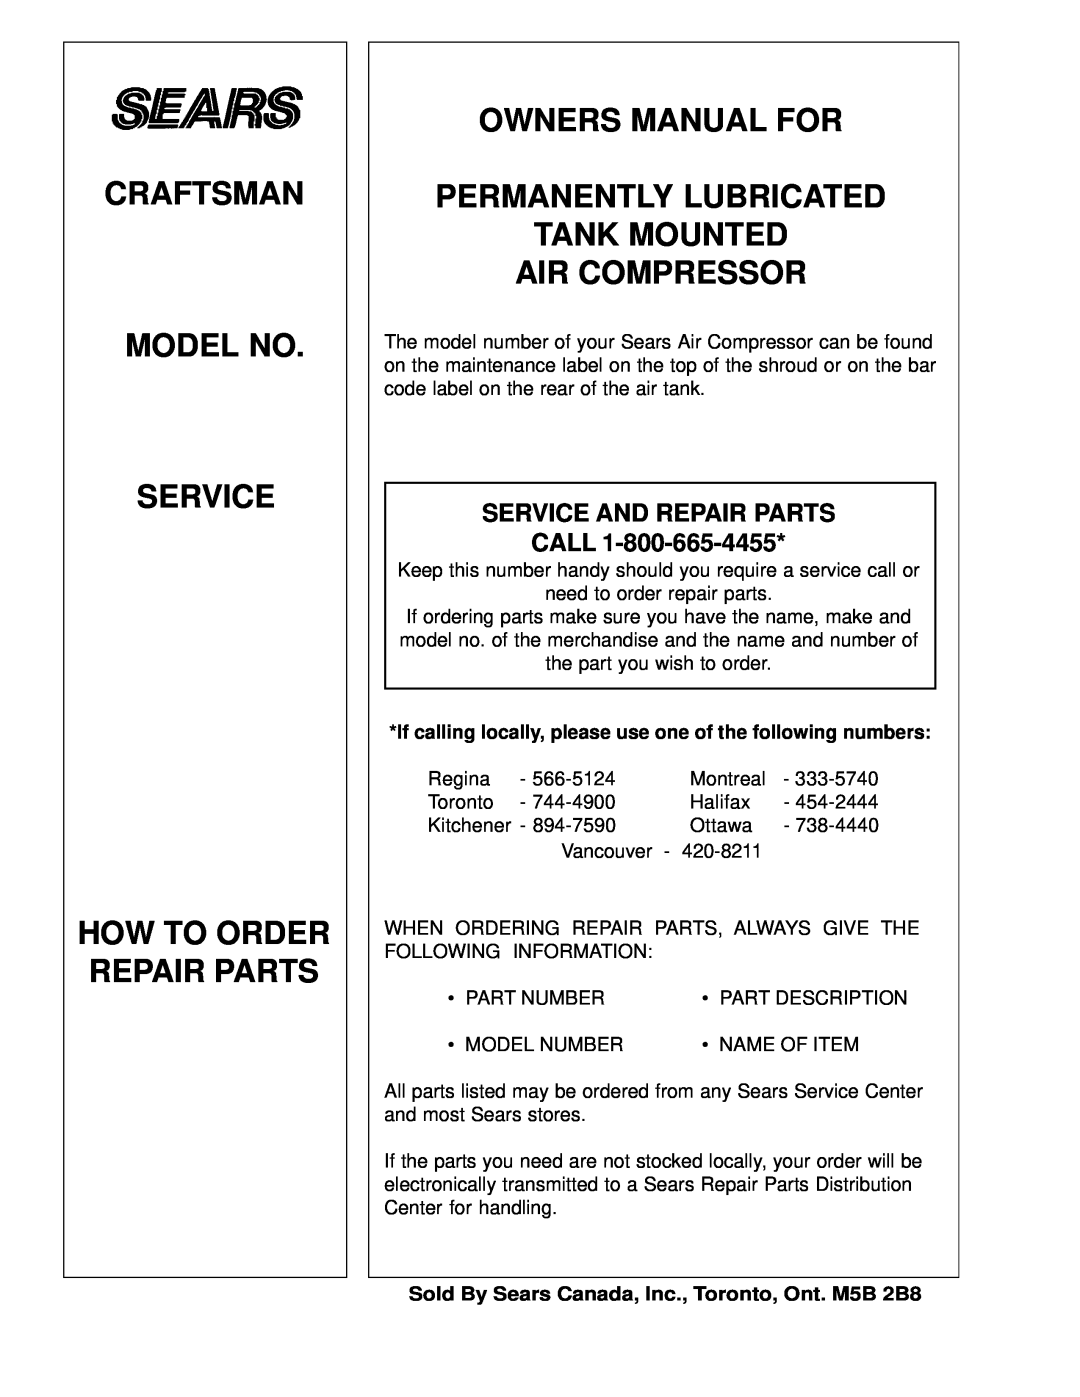 Sears 919.72512 owner manual Craftsman Model No Service How To Order Repair Parts, Service And Repair Parts Call 